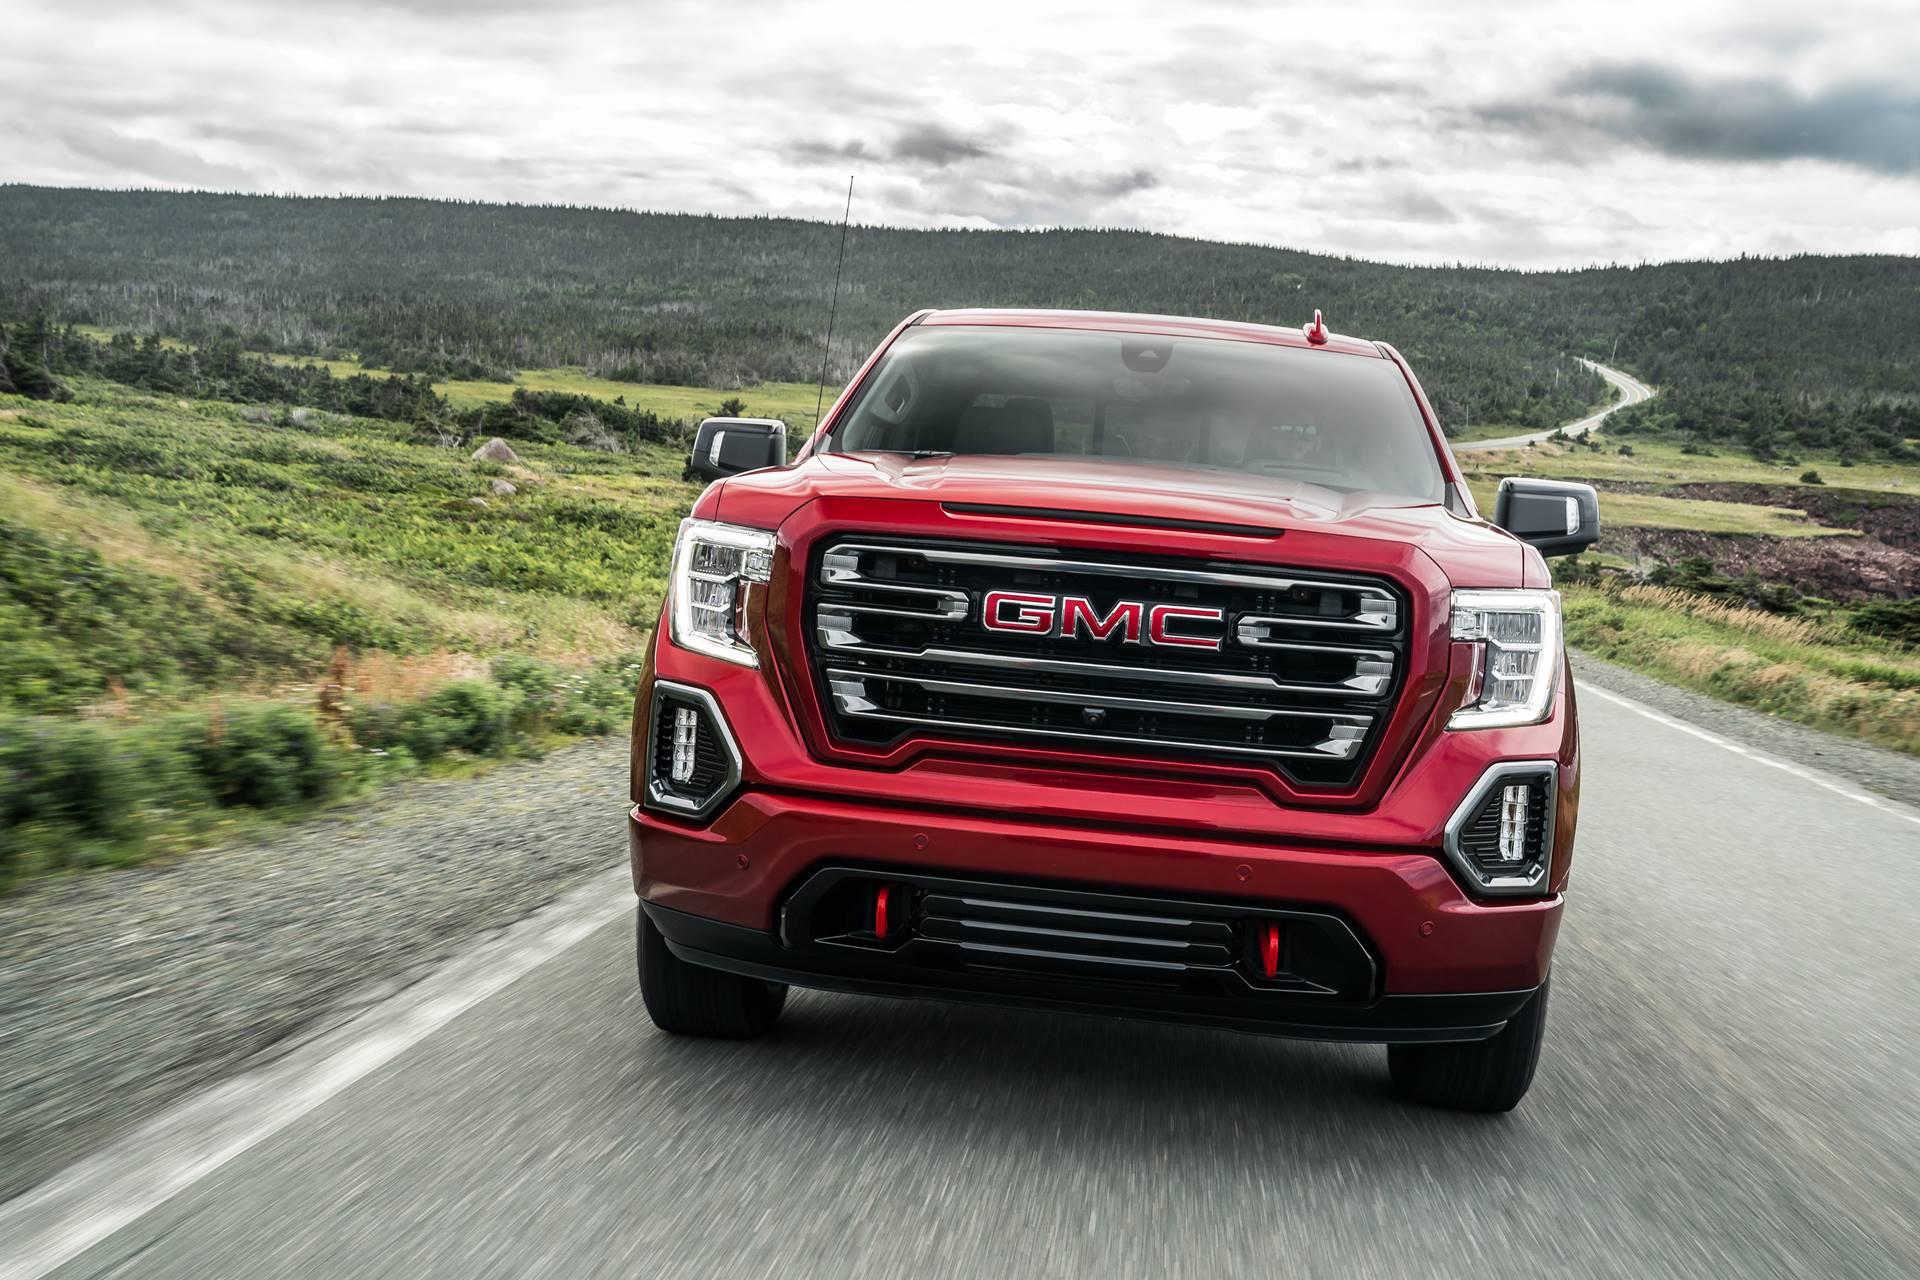 2020 Gmc Sierra At4 Image Photo 10 Of 50